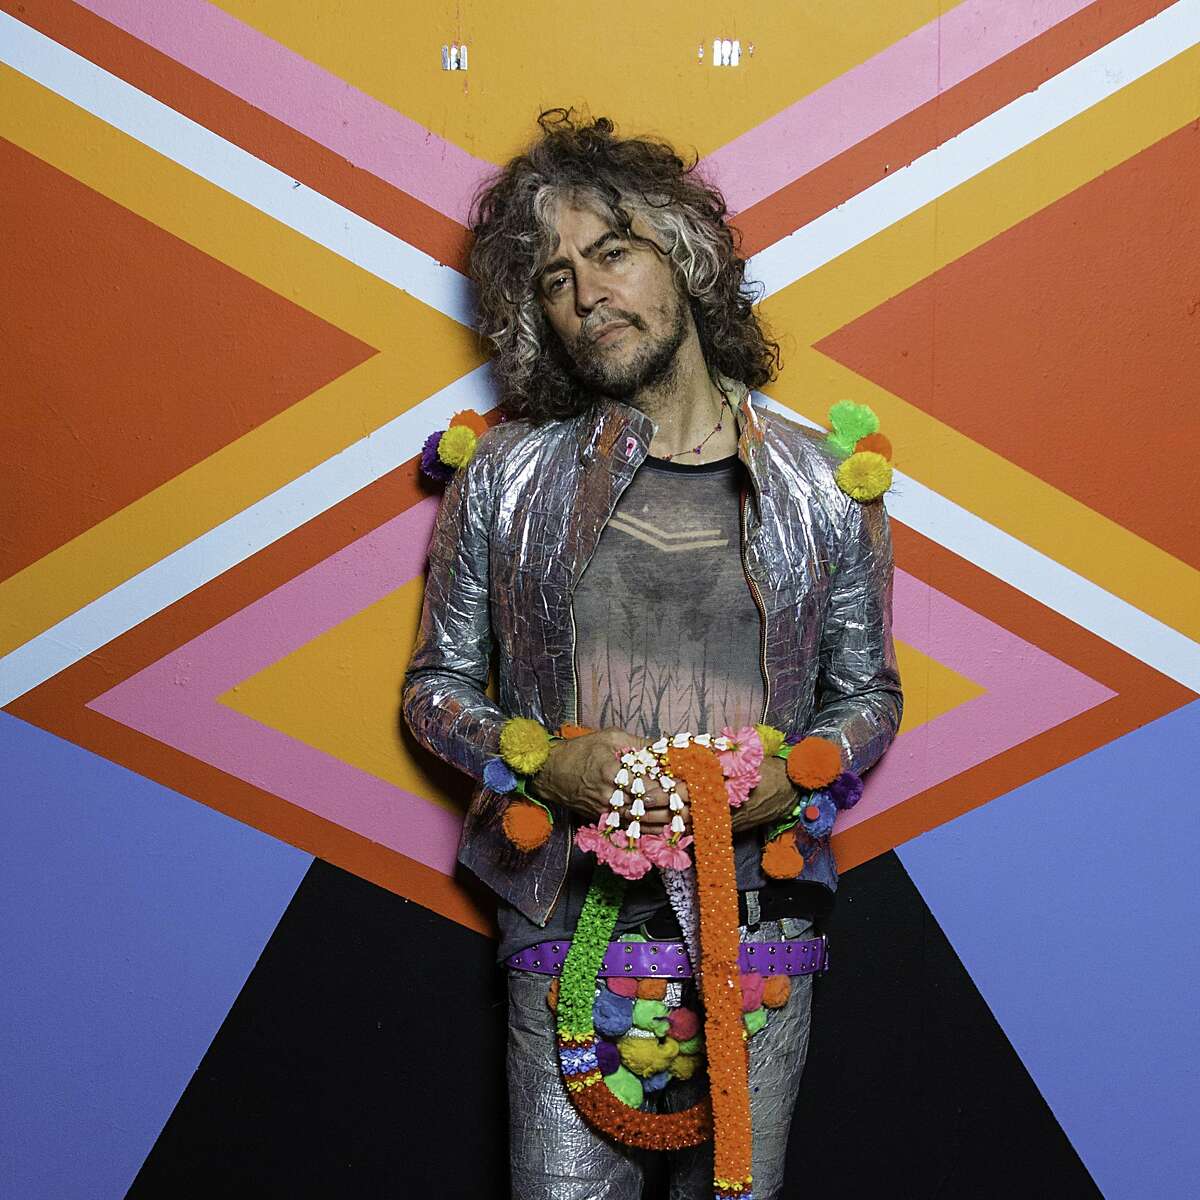 Wayne Coyne is the lead singer of The Flaming Lips, which performs May 10 at the Fox Theater in Oakland.